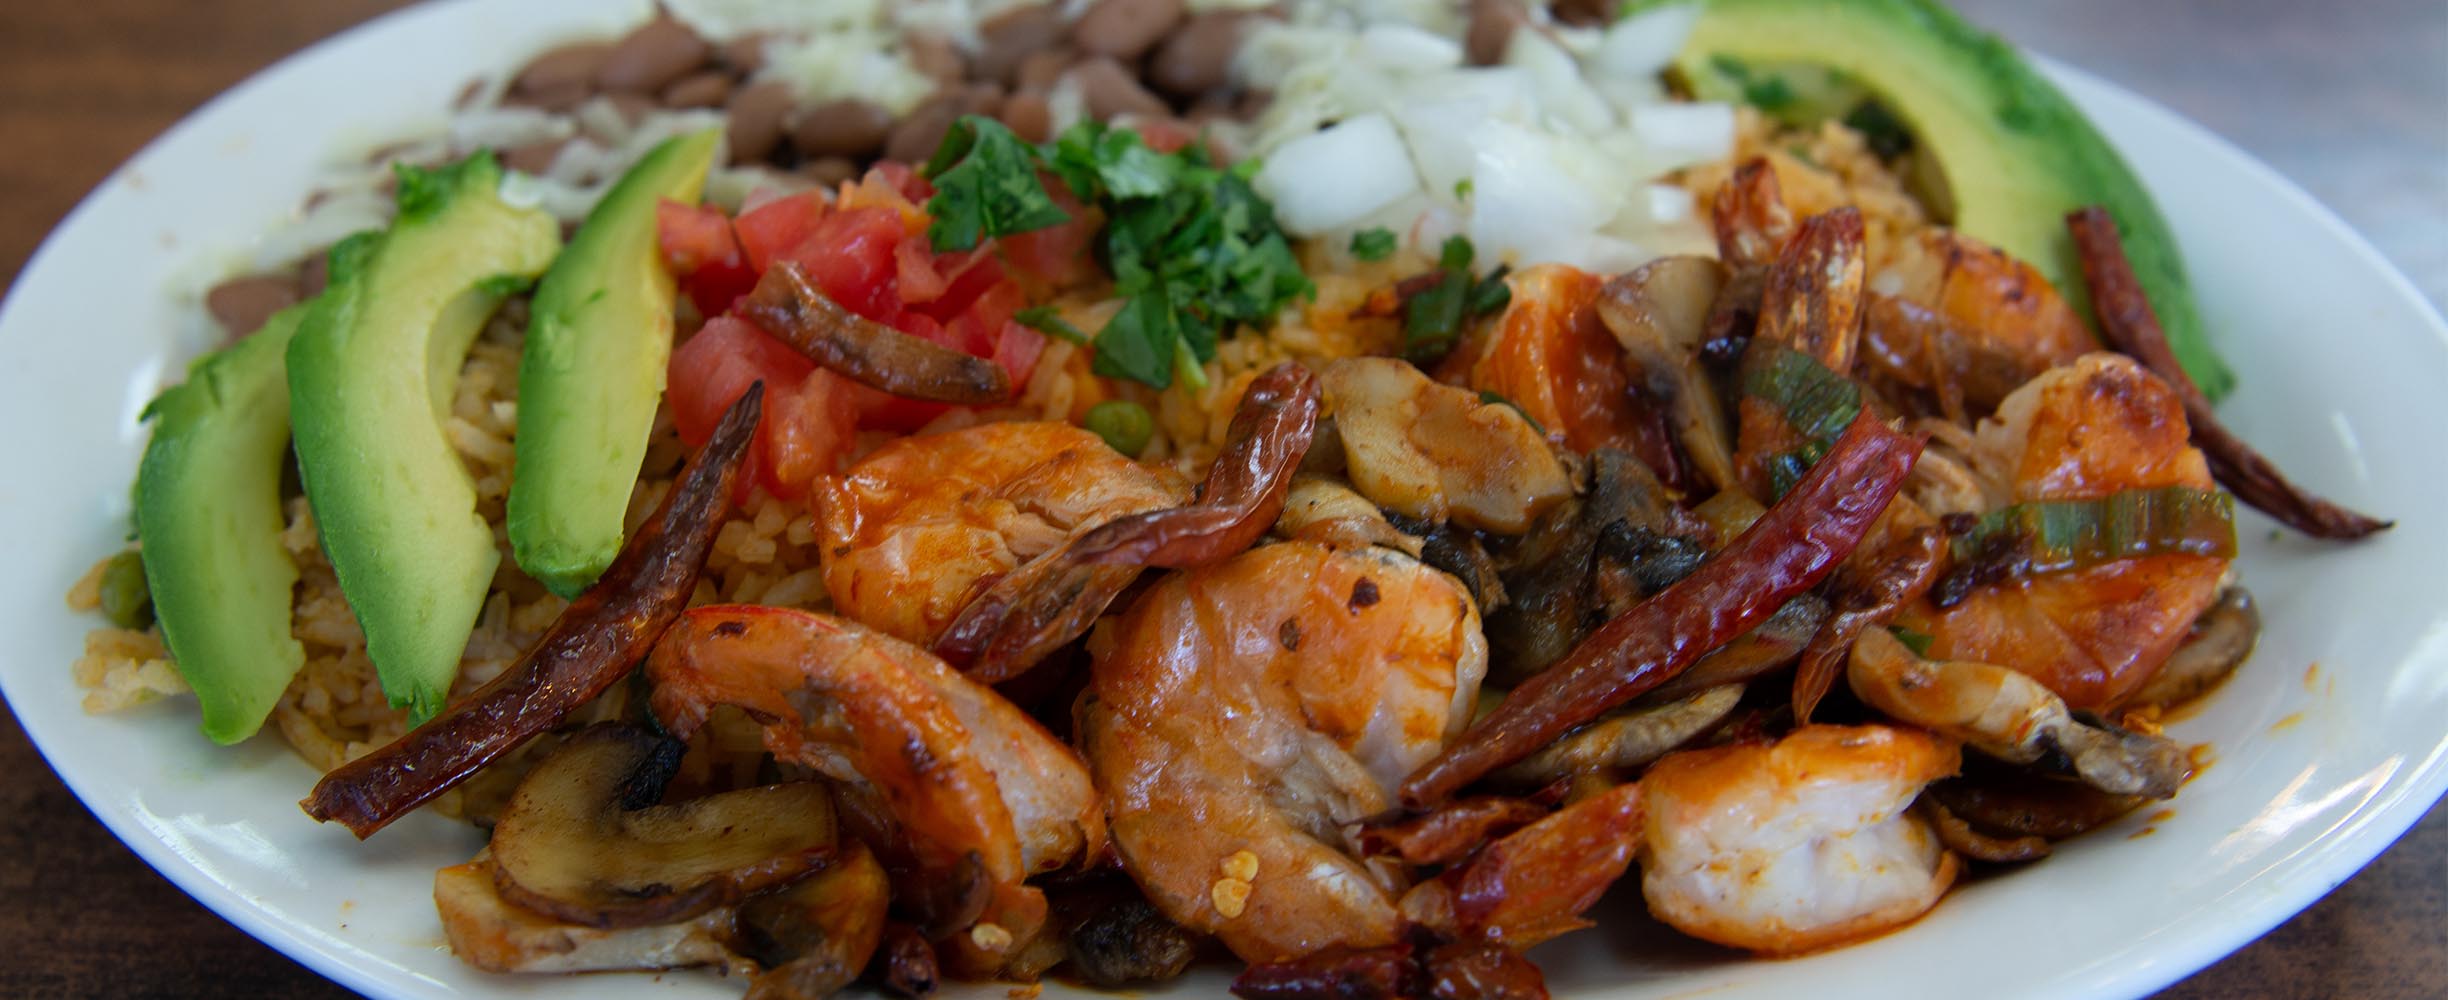 Mexican dish platter with shrimp, beef, chicken, avocado, beans and salad with delisious salsa in San Francisco